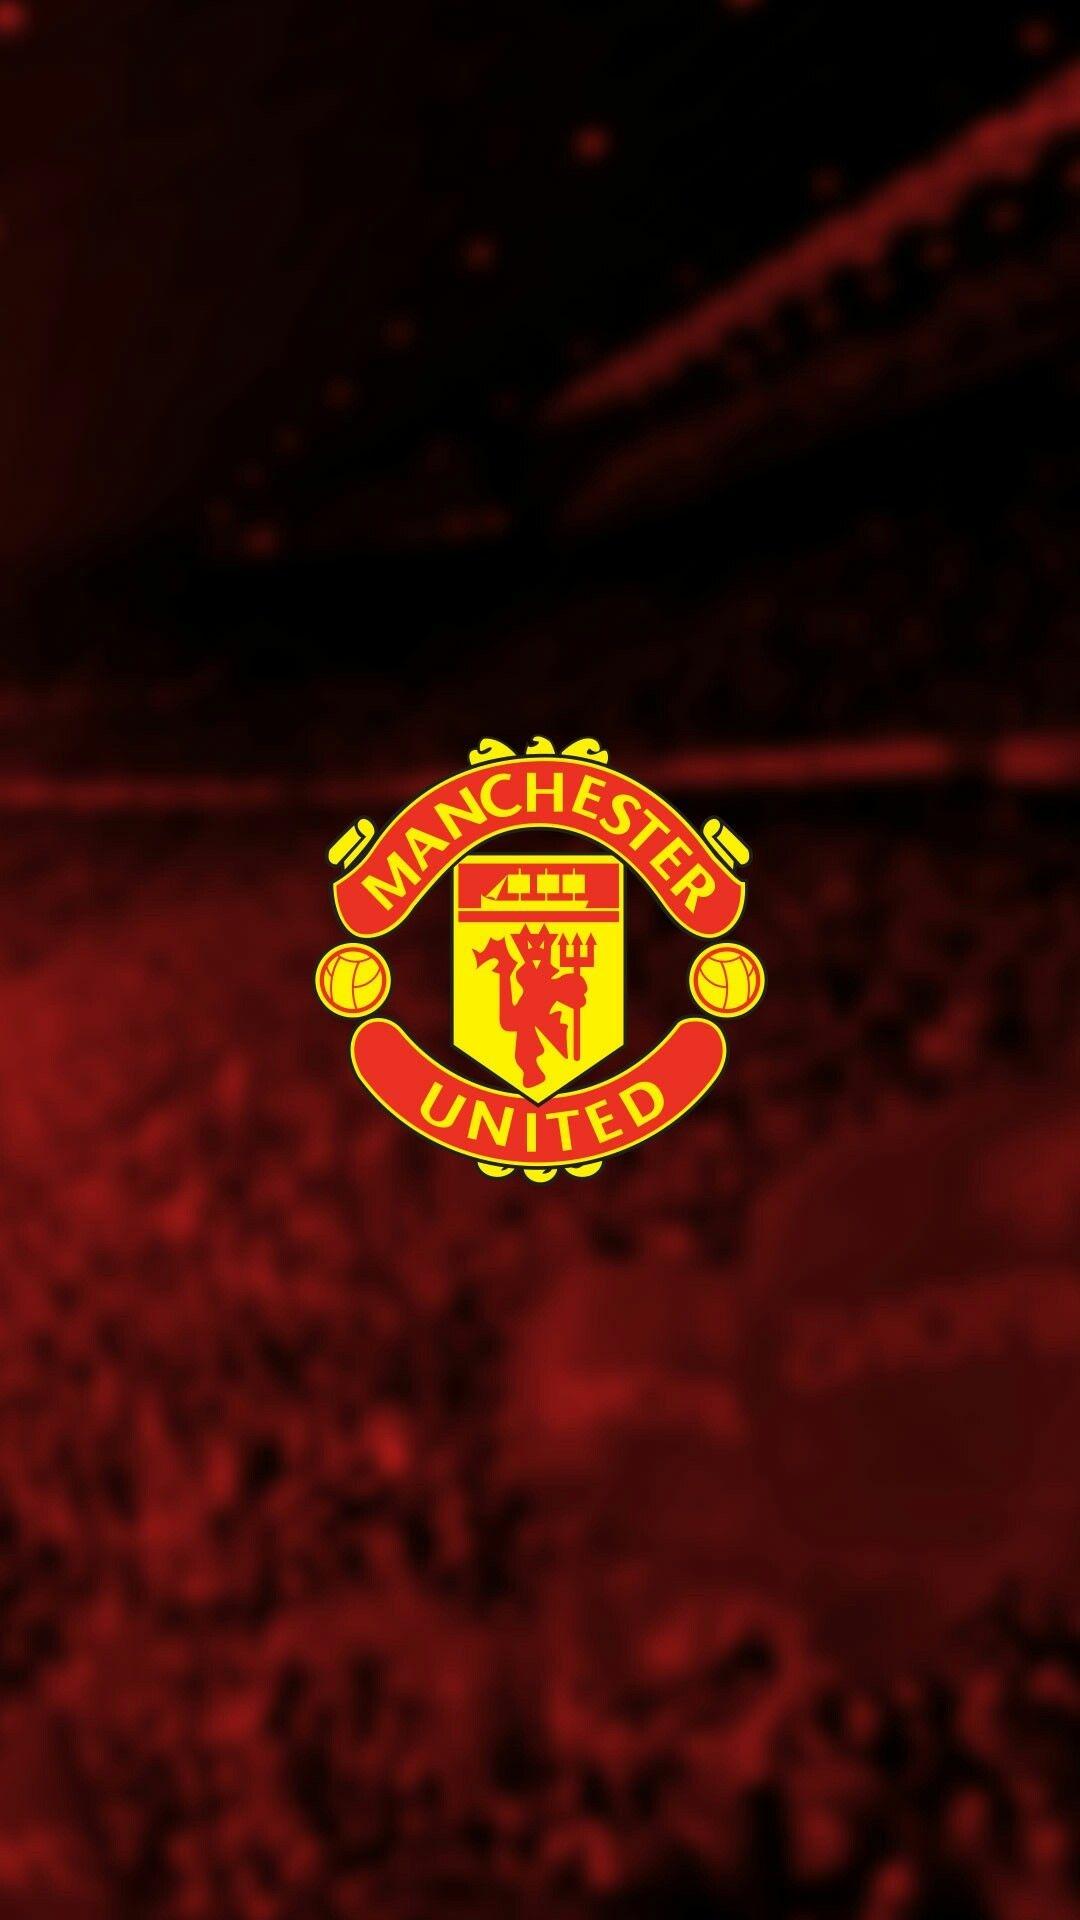 Inspirational Manchester United HD Wallpaper. Great